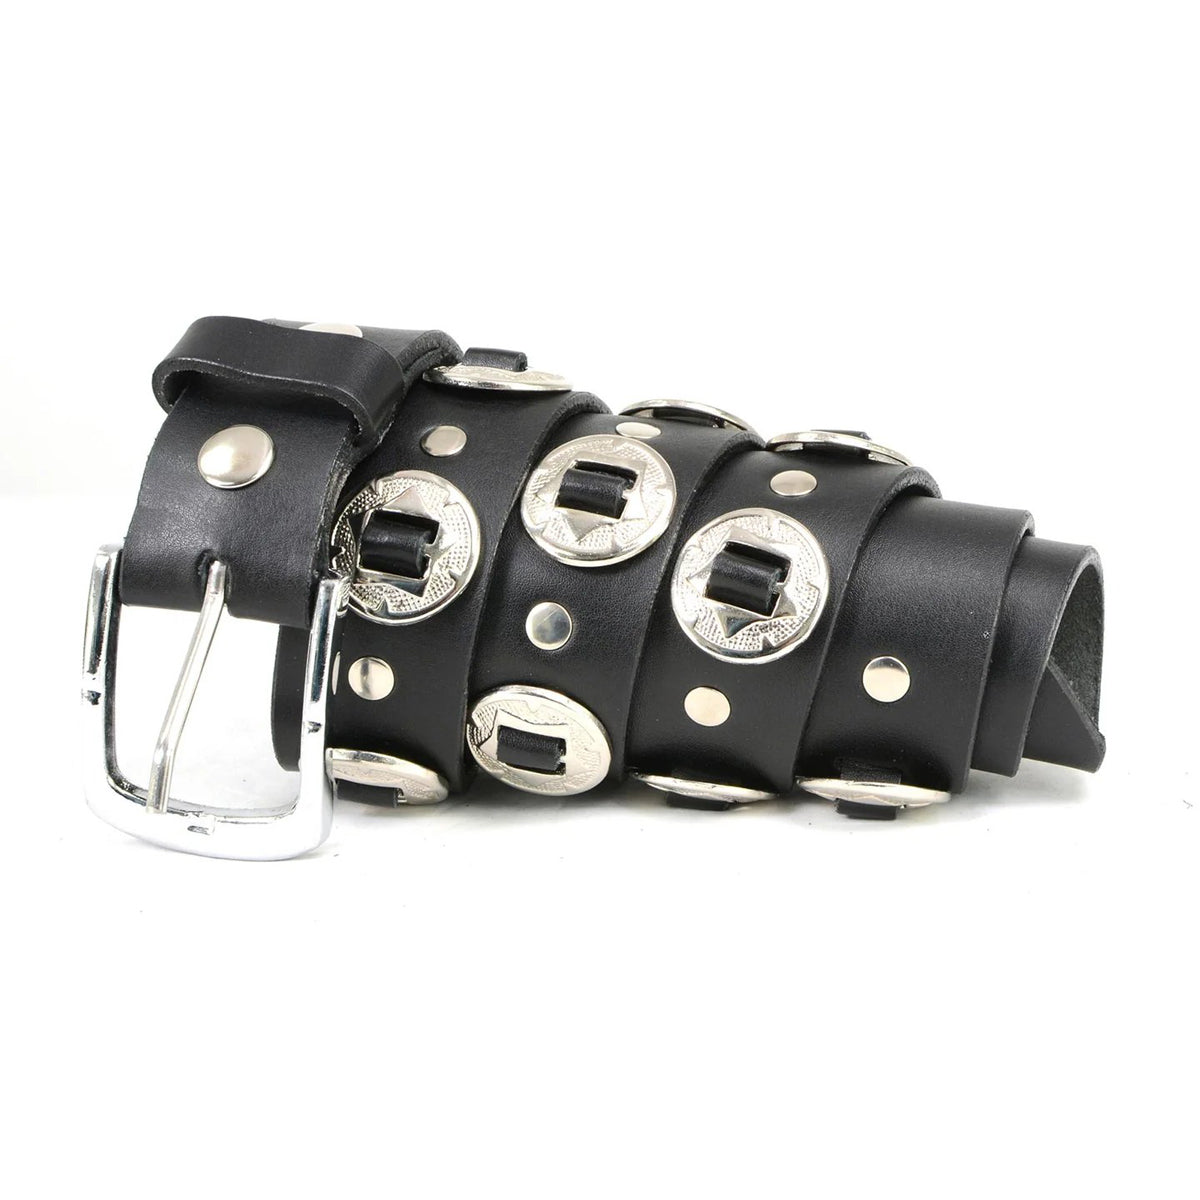 Men's Chrome Conchos - Black Genuine Leather Belt with Interchangeable Buckle - 1.5 inches Wide